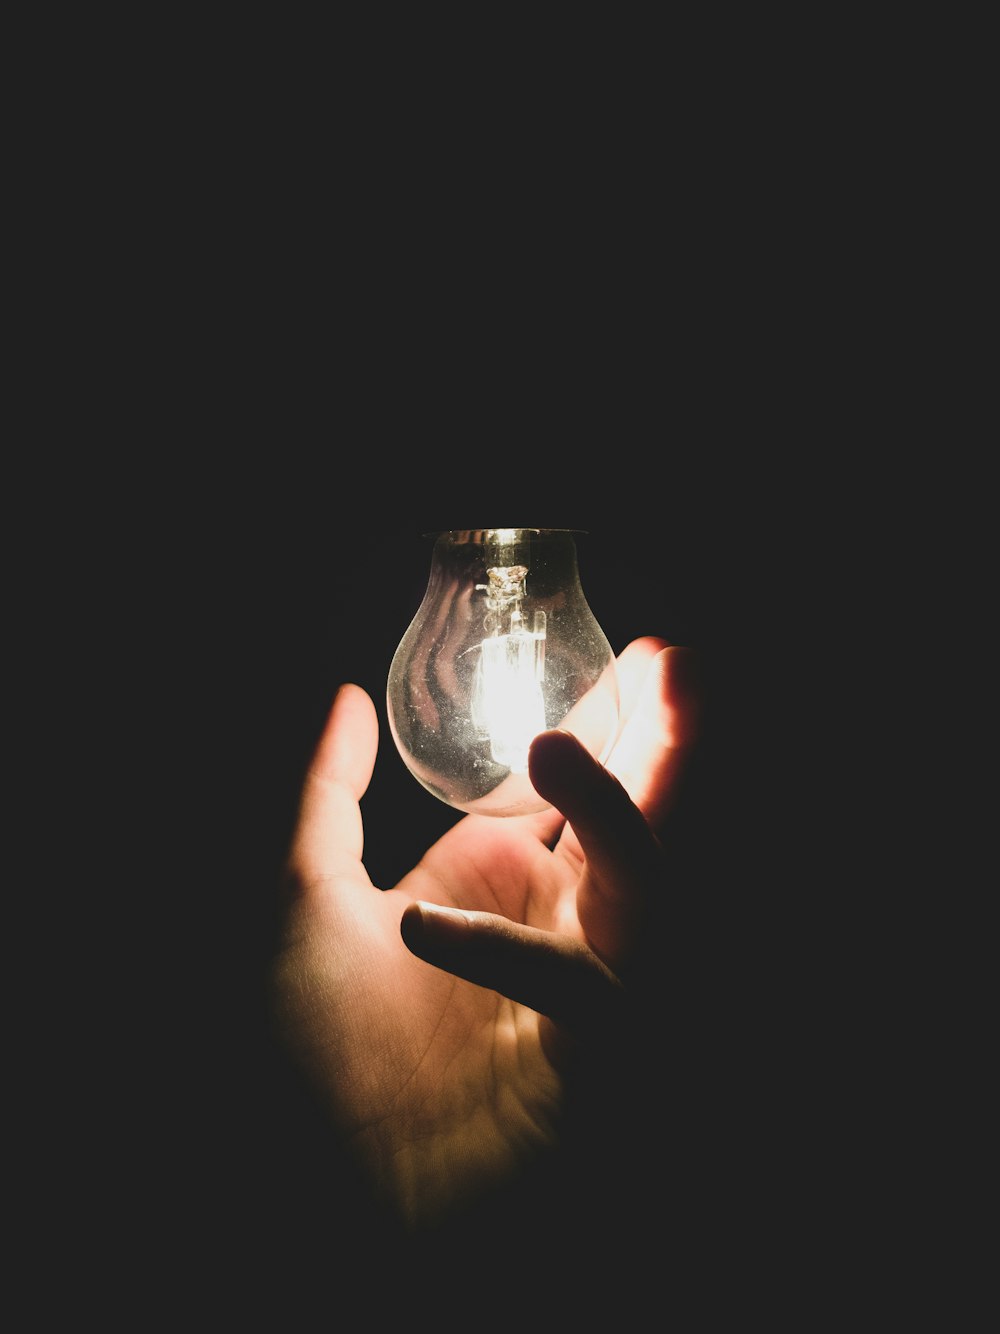 person holding turned-on light bulb